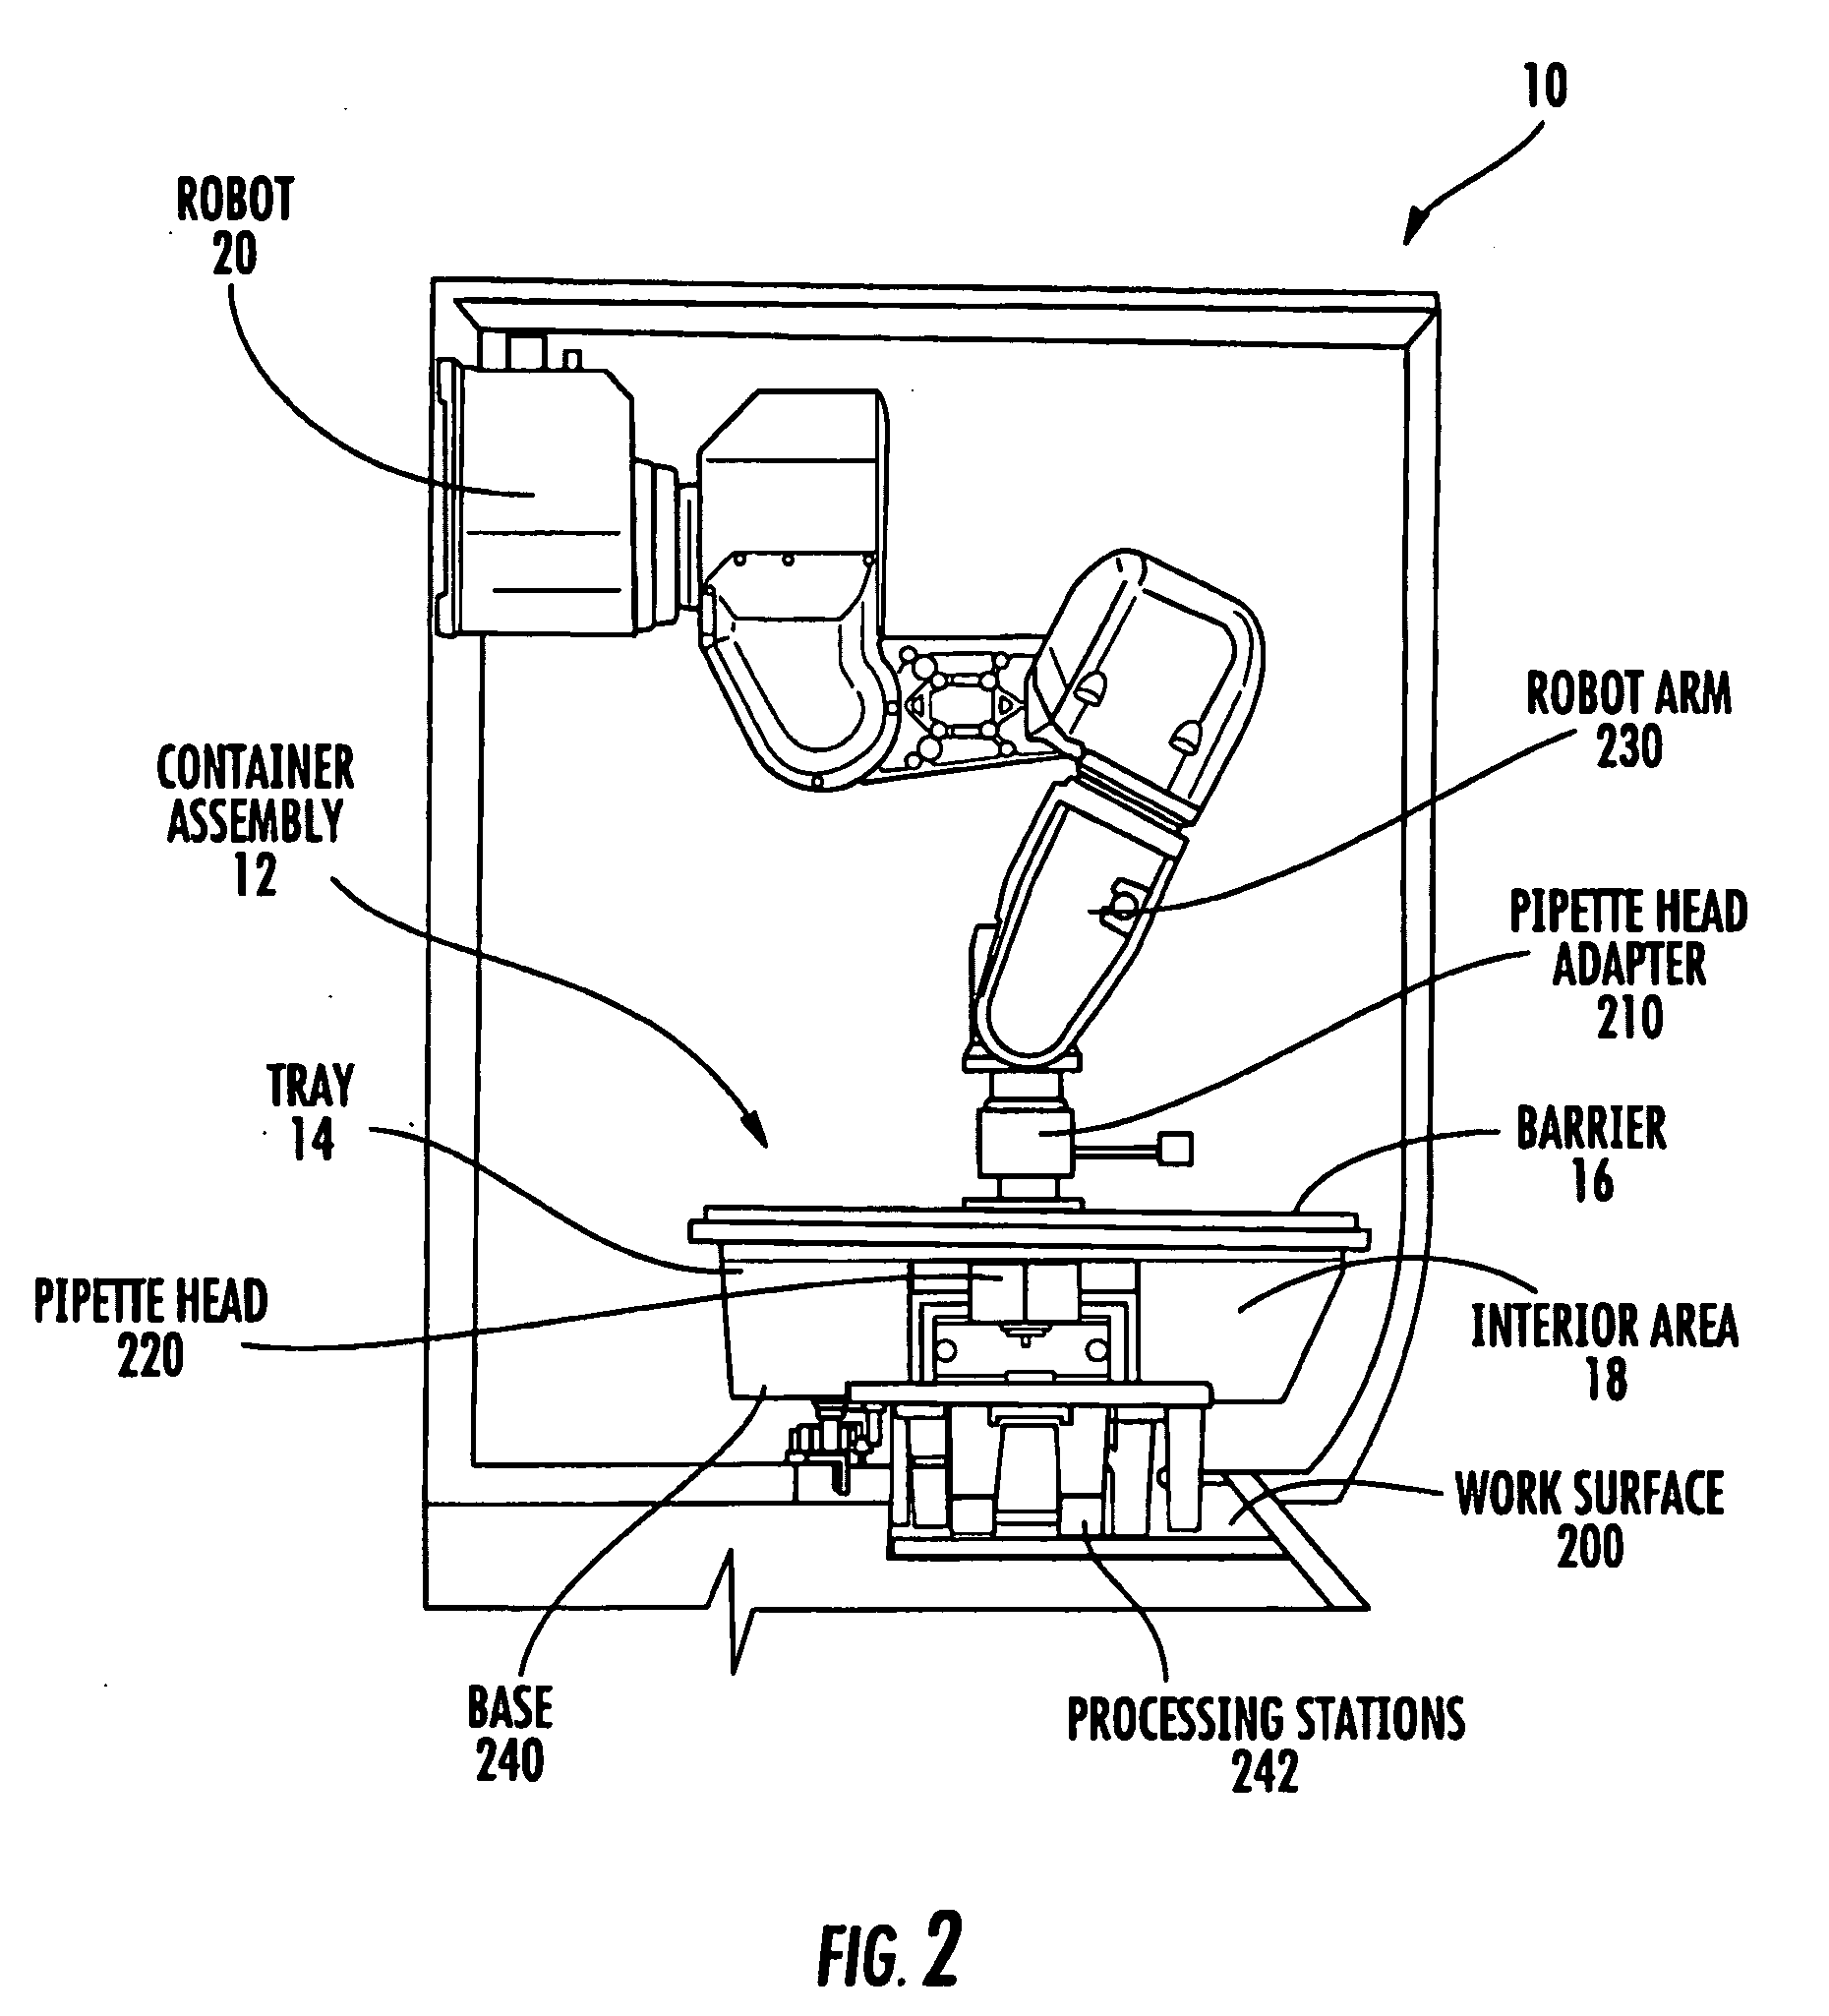 Systems and methods for processing samples in a closed container, and related devices